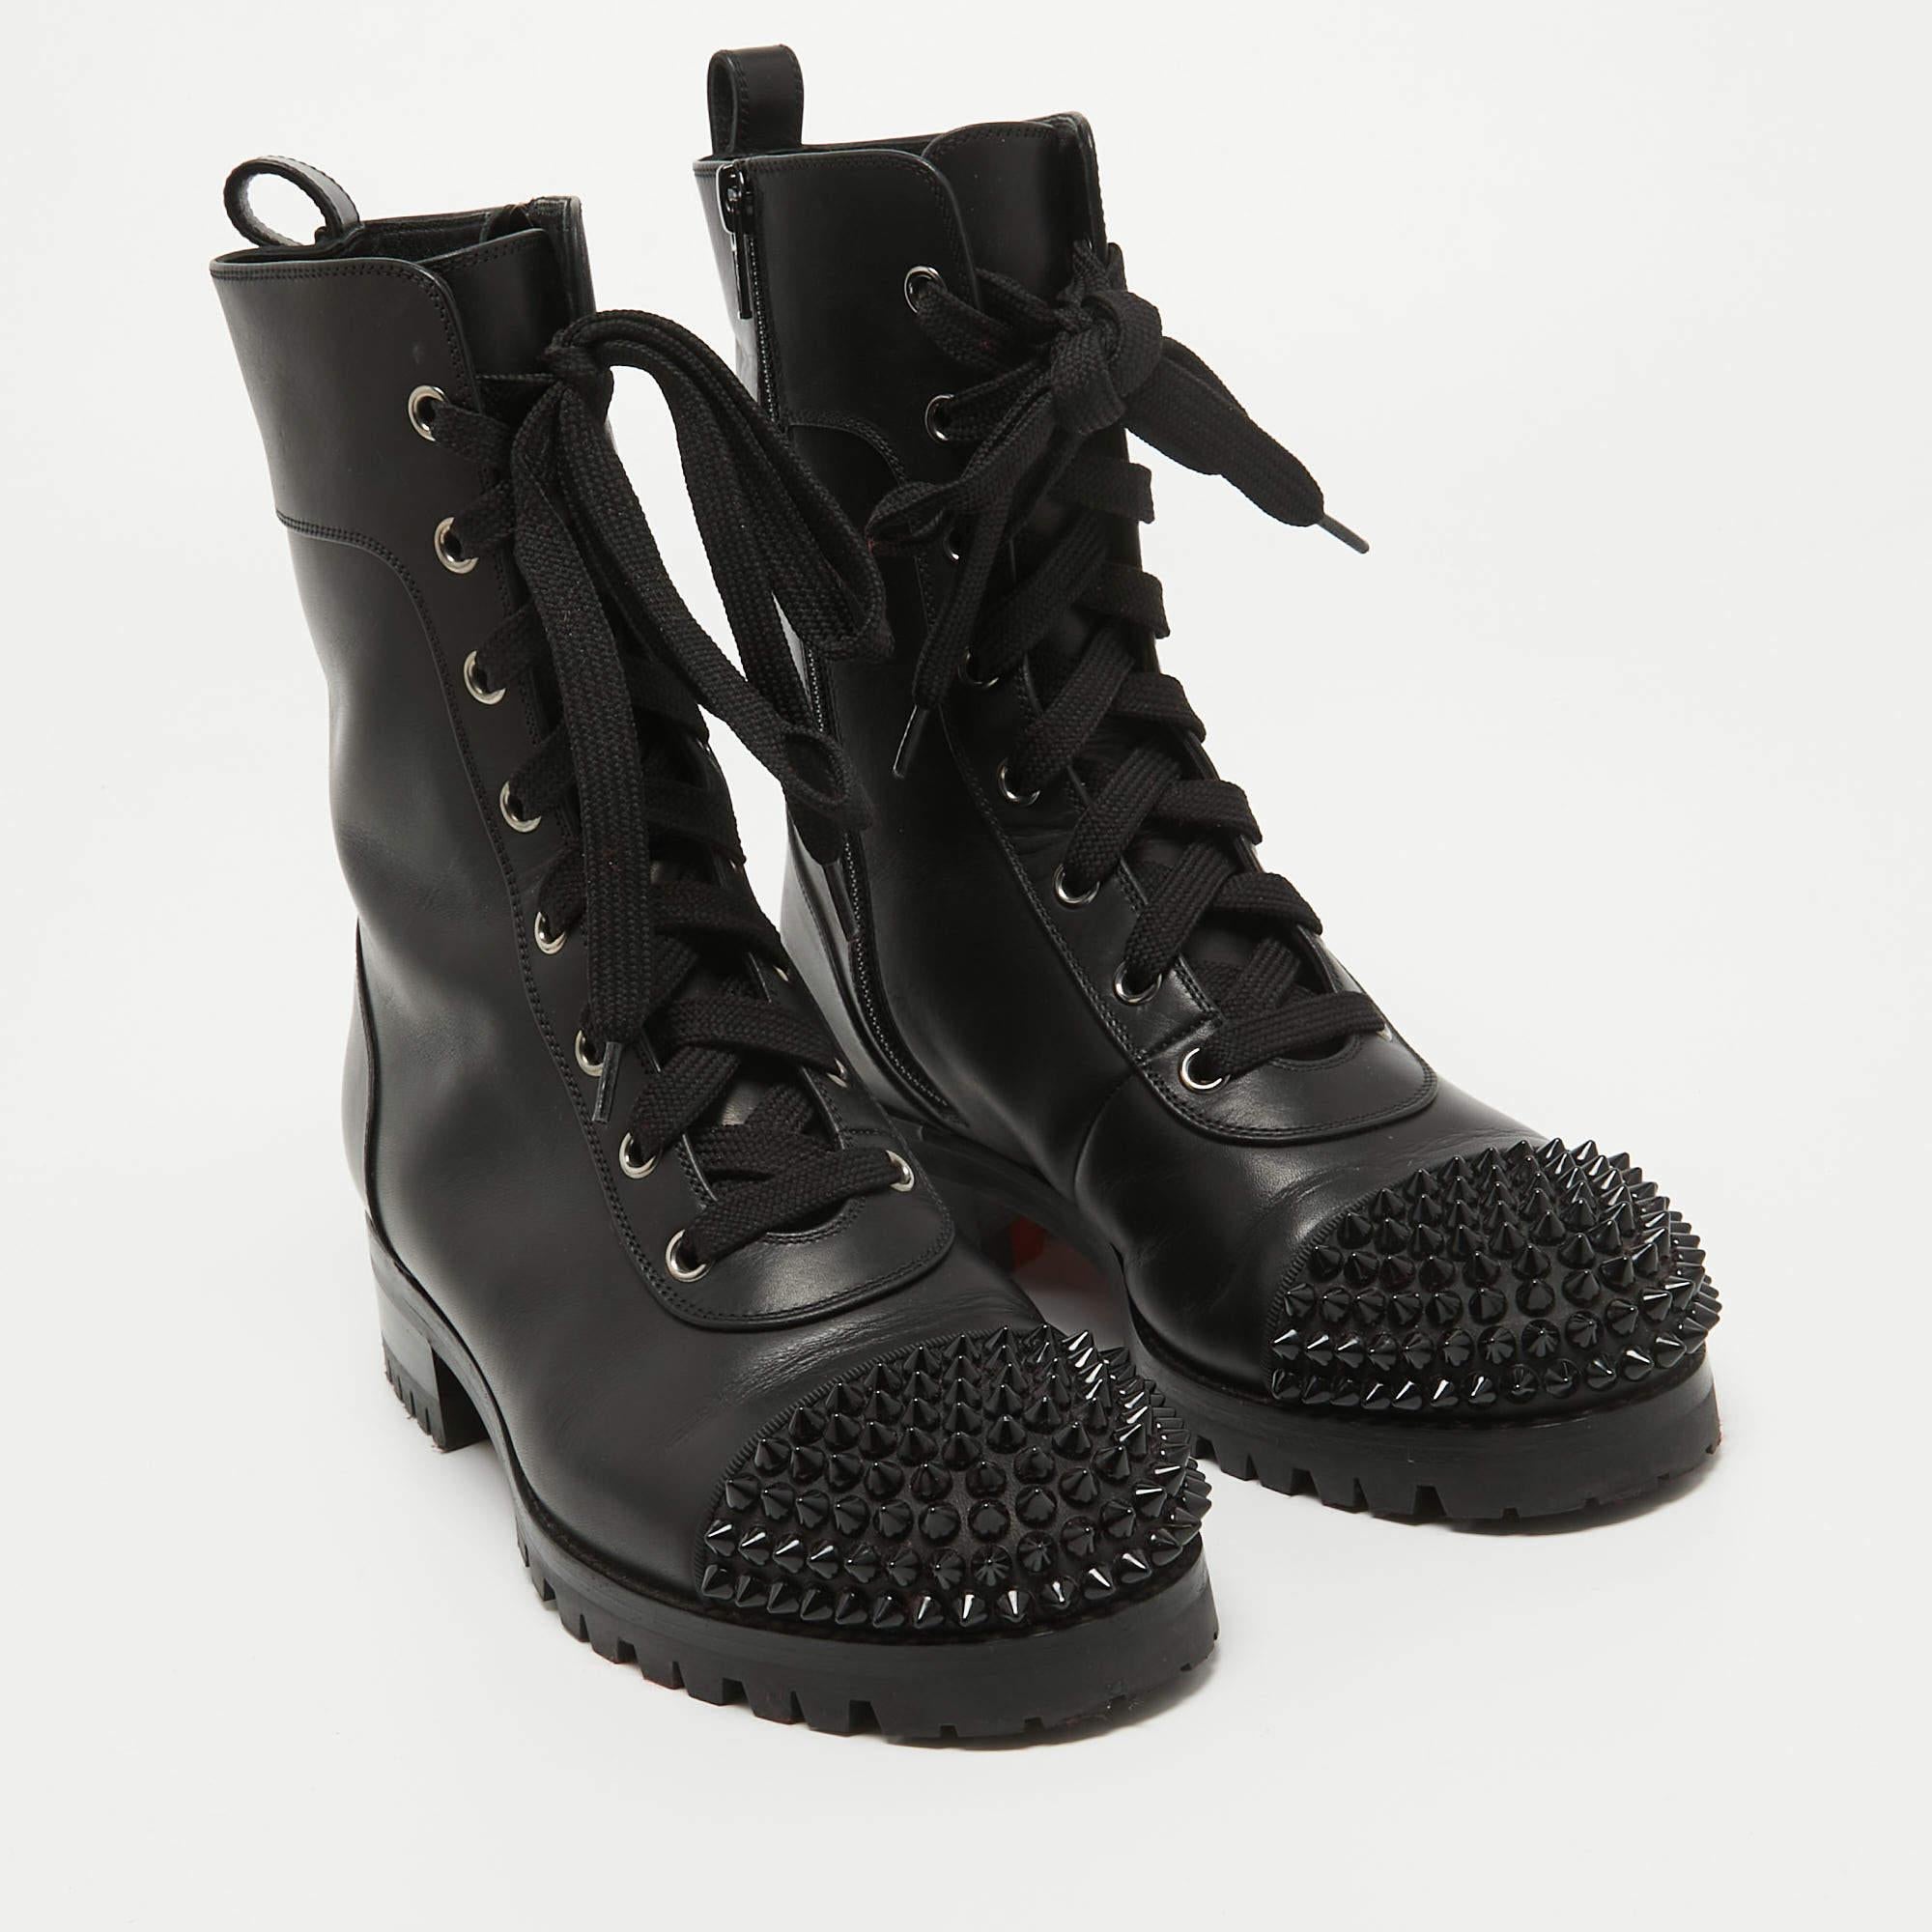 Women's Christian Louboutin Black Leather TS Croc Spiked Ankle Boots Size 36 For Sale